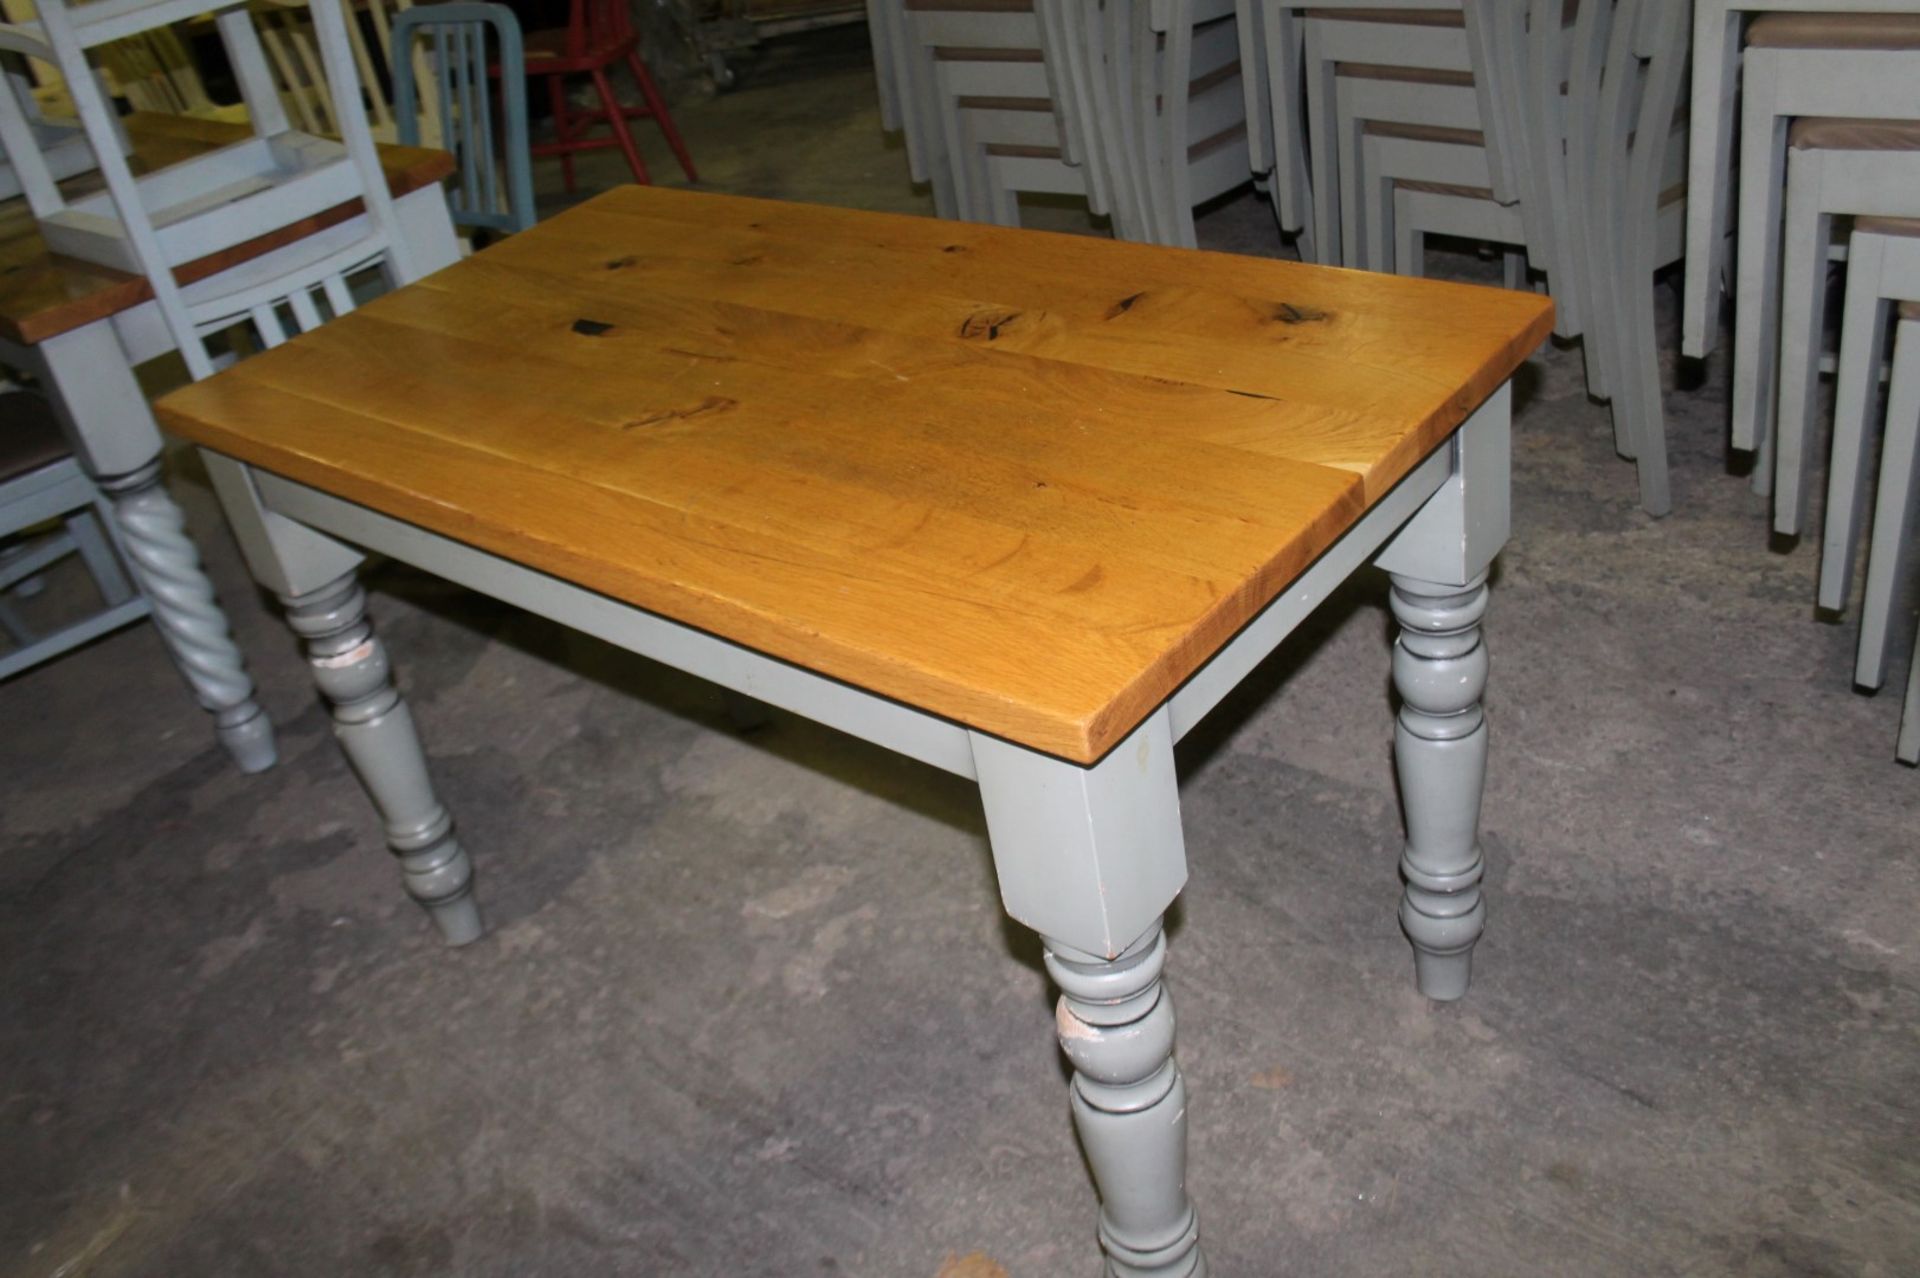 1 x Solid Wood Farmhouse Dining Table With 4 x Chairs Features Solid Oak Table Top and Upholstered - Image 2 of 6